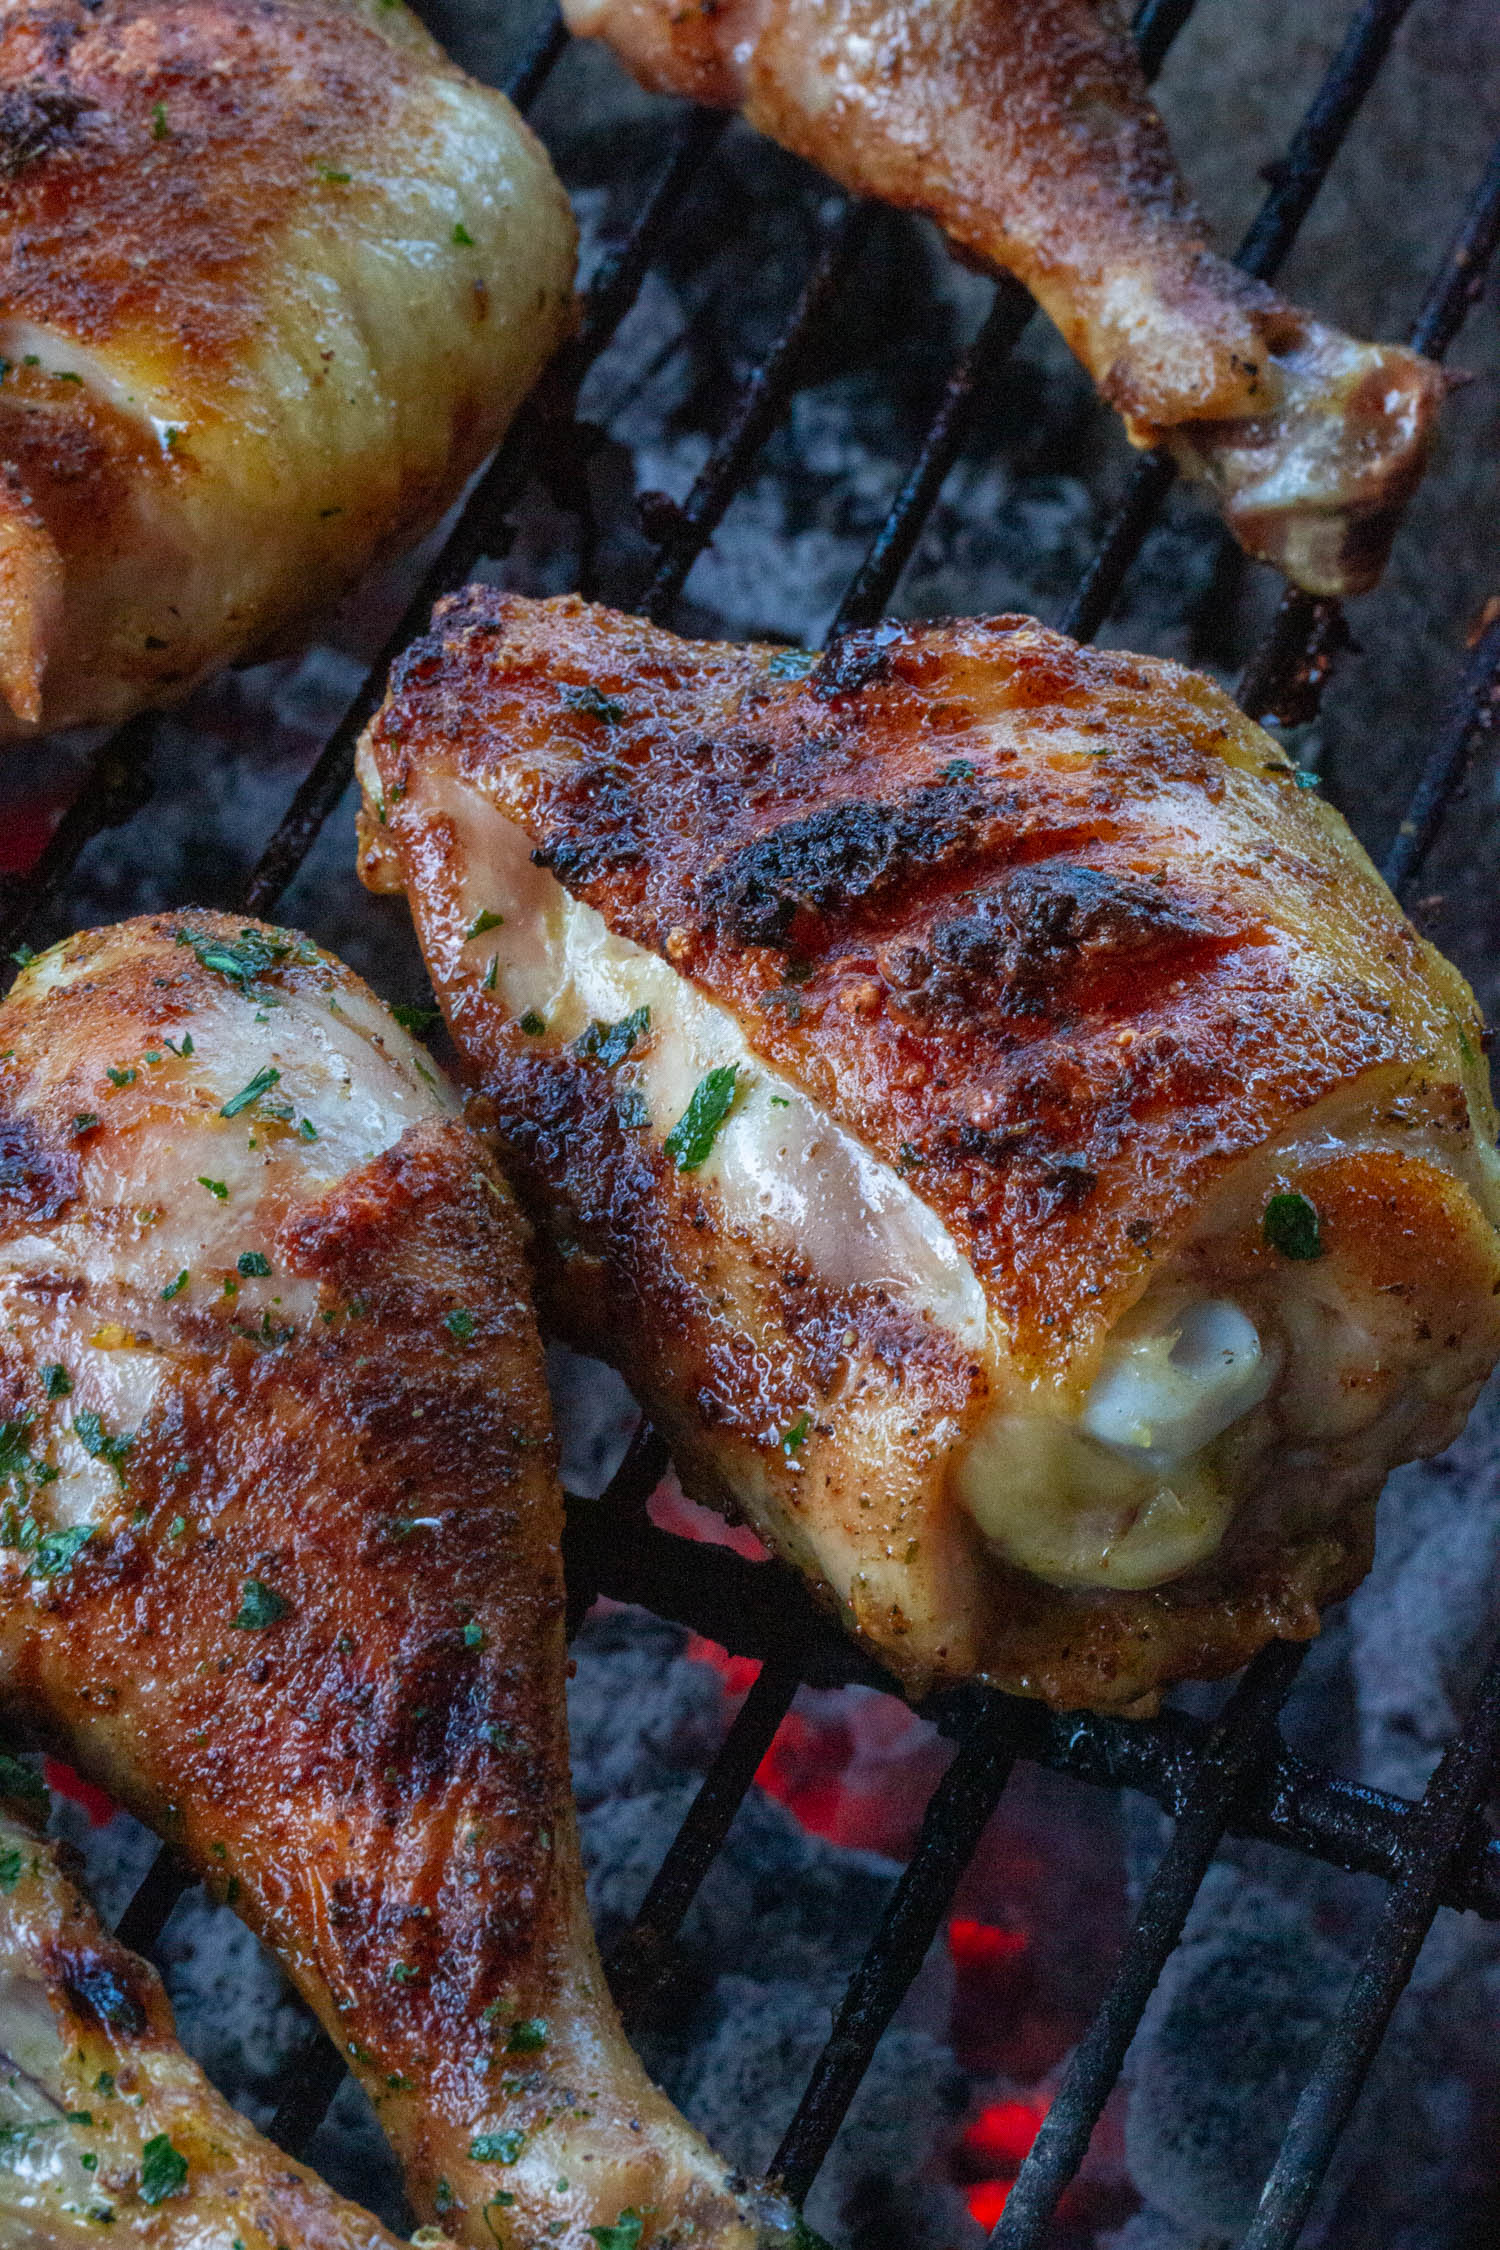 chicken thighs and legs arranged over a charcoal grill